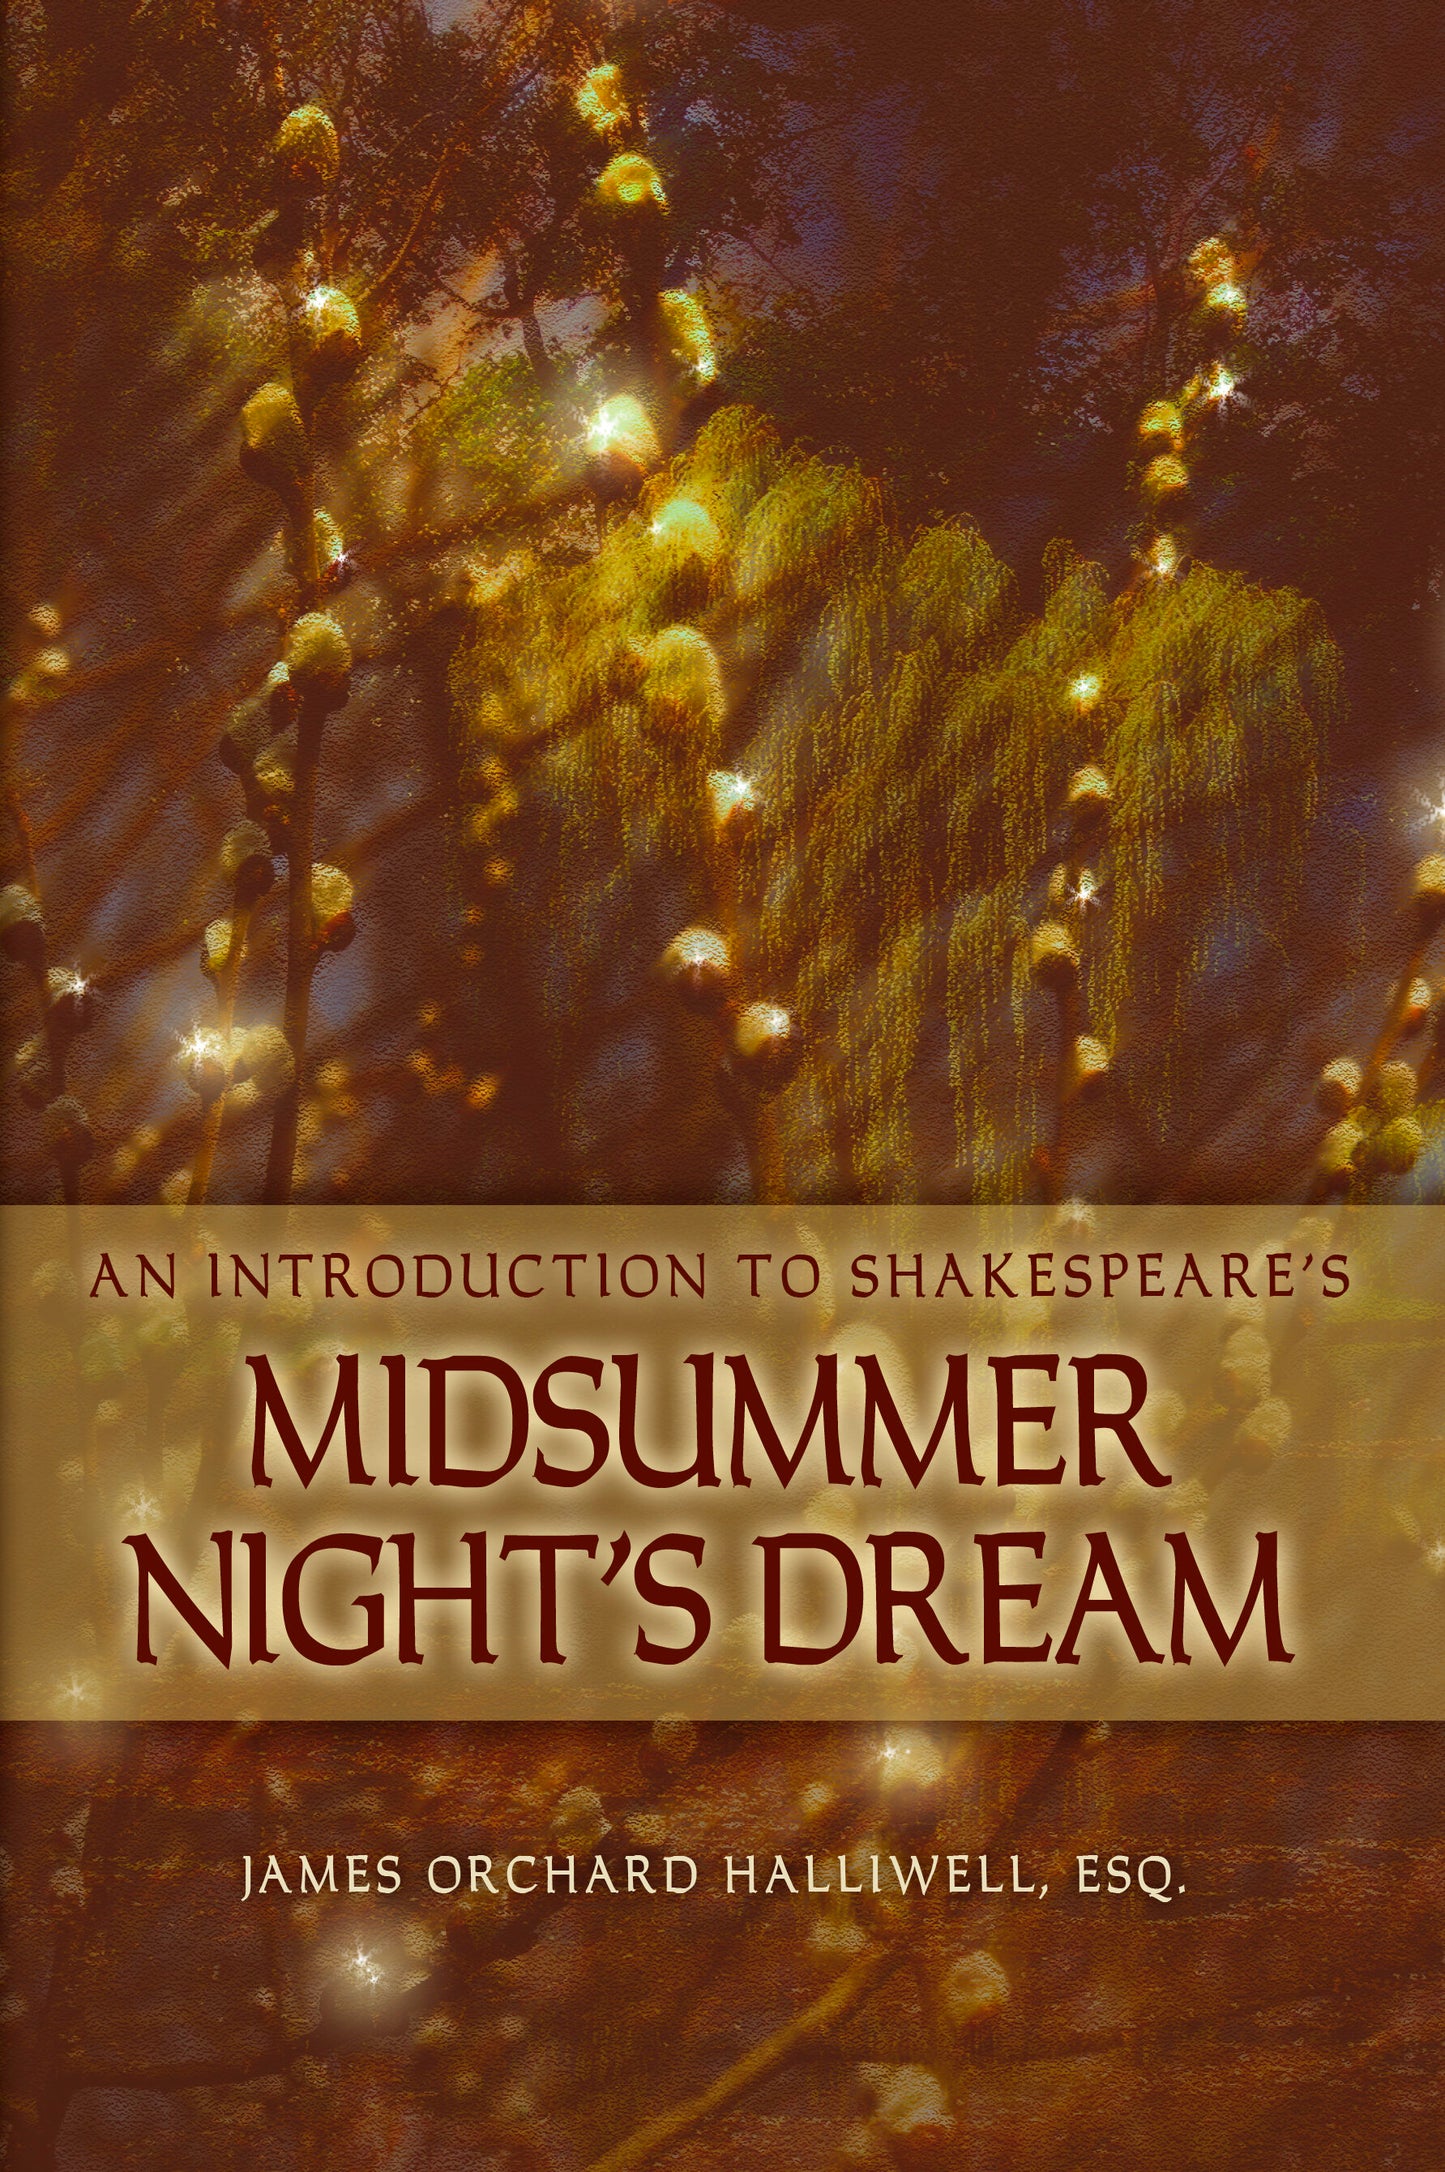 An Introduction To Shakespeare's Midsummer Nights Dream